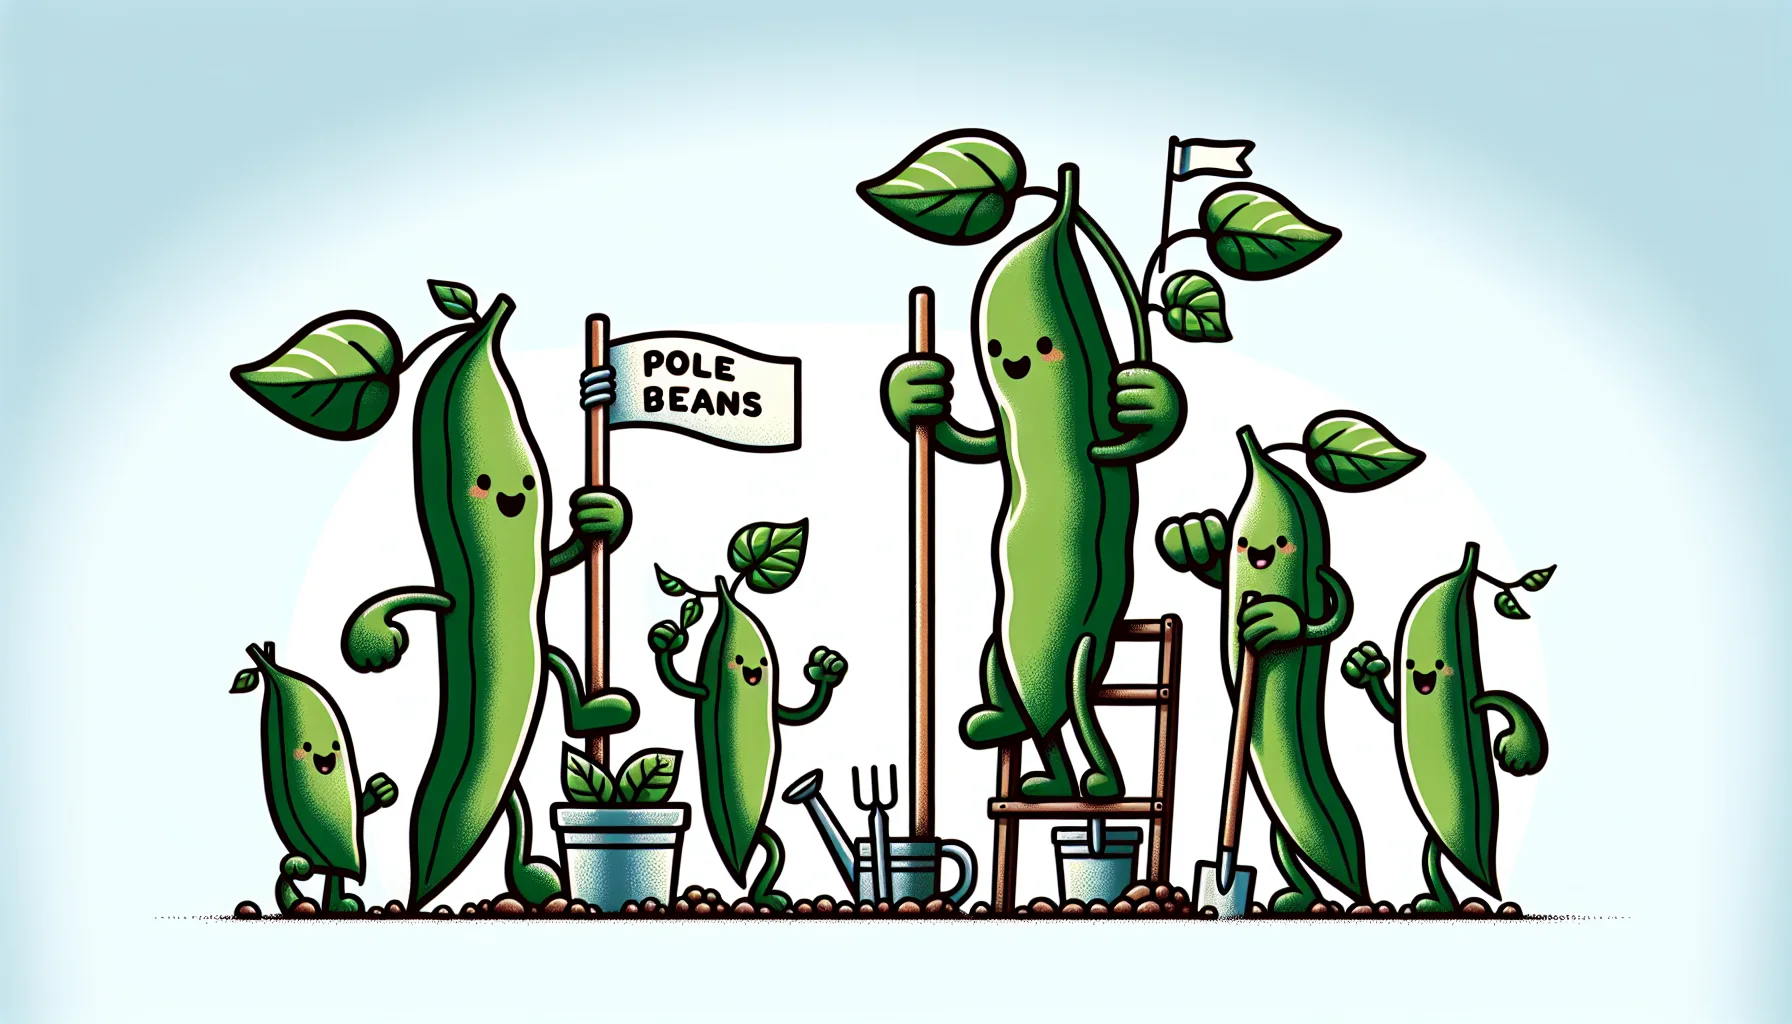 Create a humorous and realistic gardening scene with pole beans and bush beans engaged in a friendly competition. The pole beans, growing tall and slender, are carrying flags for height, while the bush beans, staying low but spread out, are showcasing their compact growth habit with a banner. There are gardening tools and plants scattered around, underscoring the fun and joy of gardening.